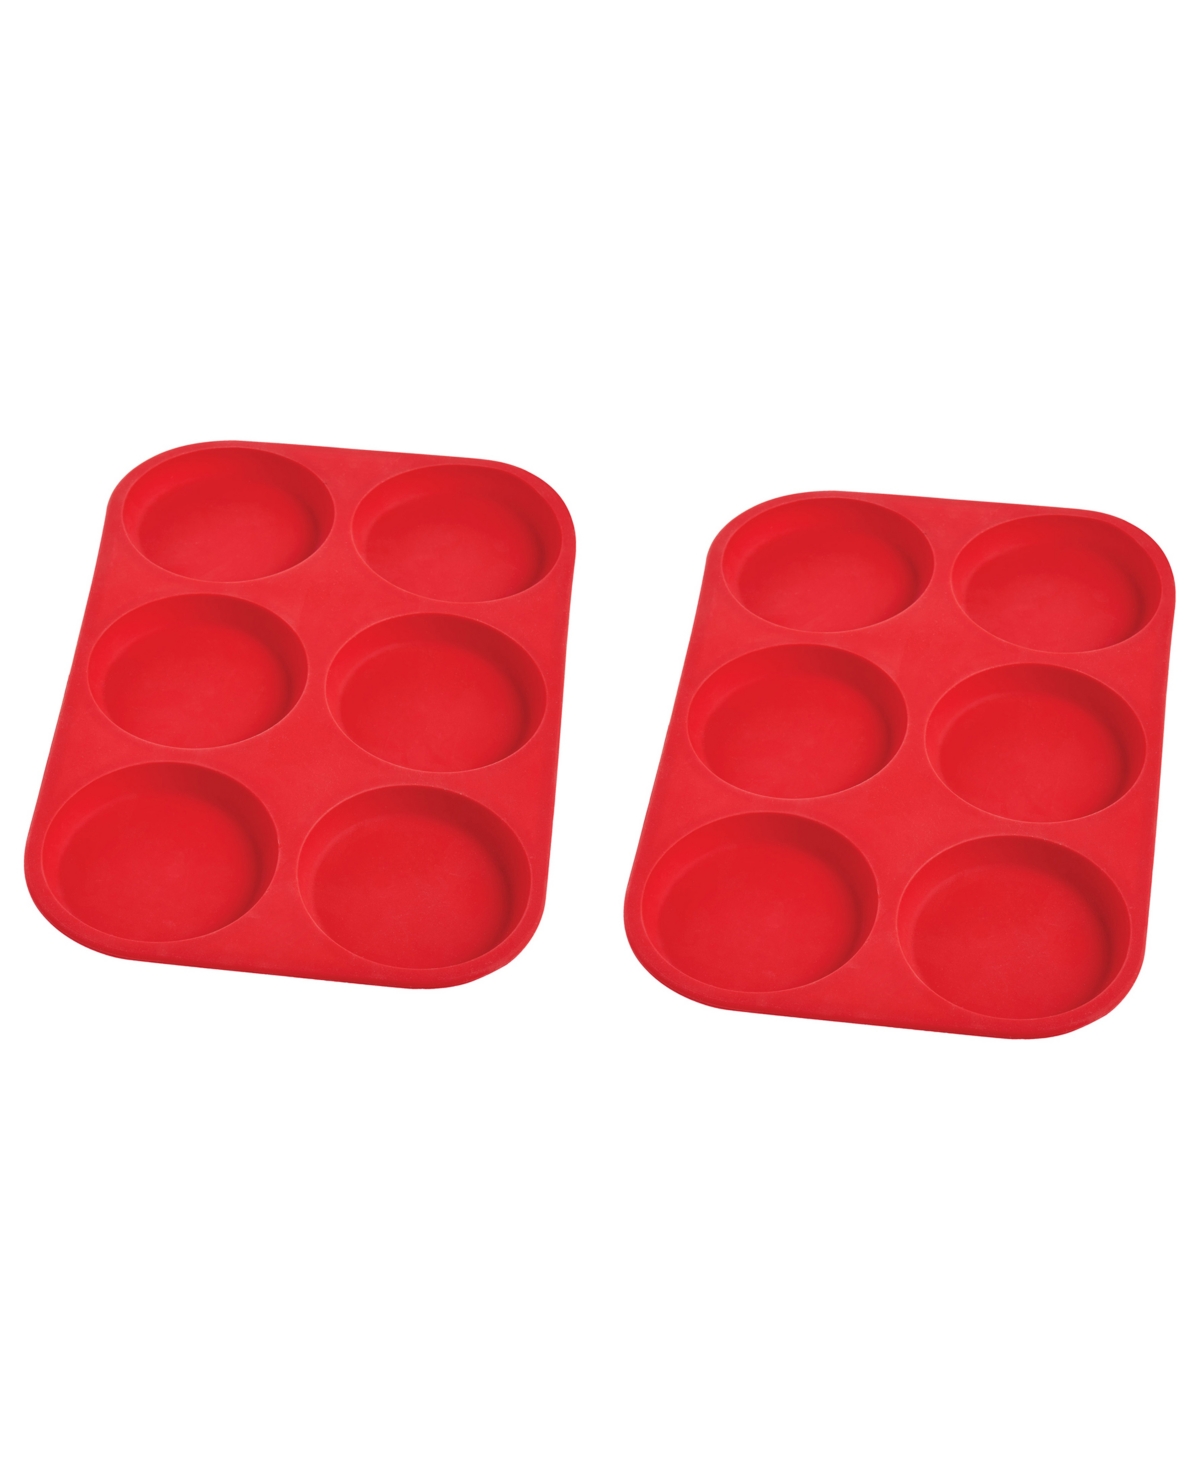 Mrs. Anderson's Baking Set Of 2 Silicone 6-cup Muffin Top Pan, Bpa Free, Non-stick European-grade Silicone, 13.18" X 9" X 0 In Red